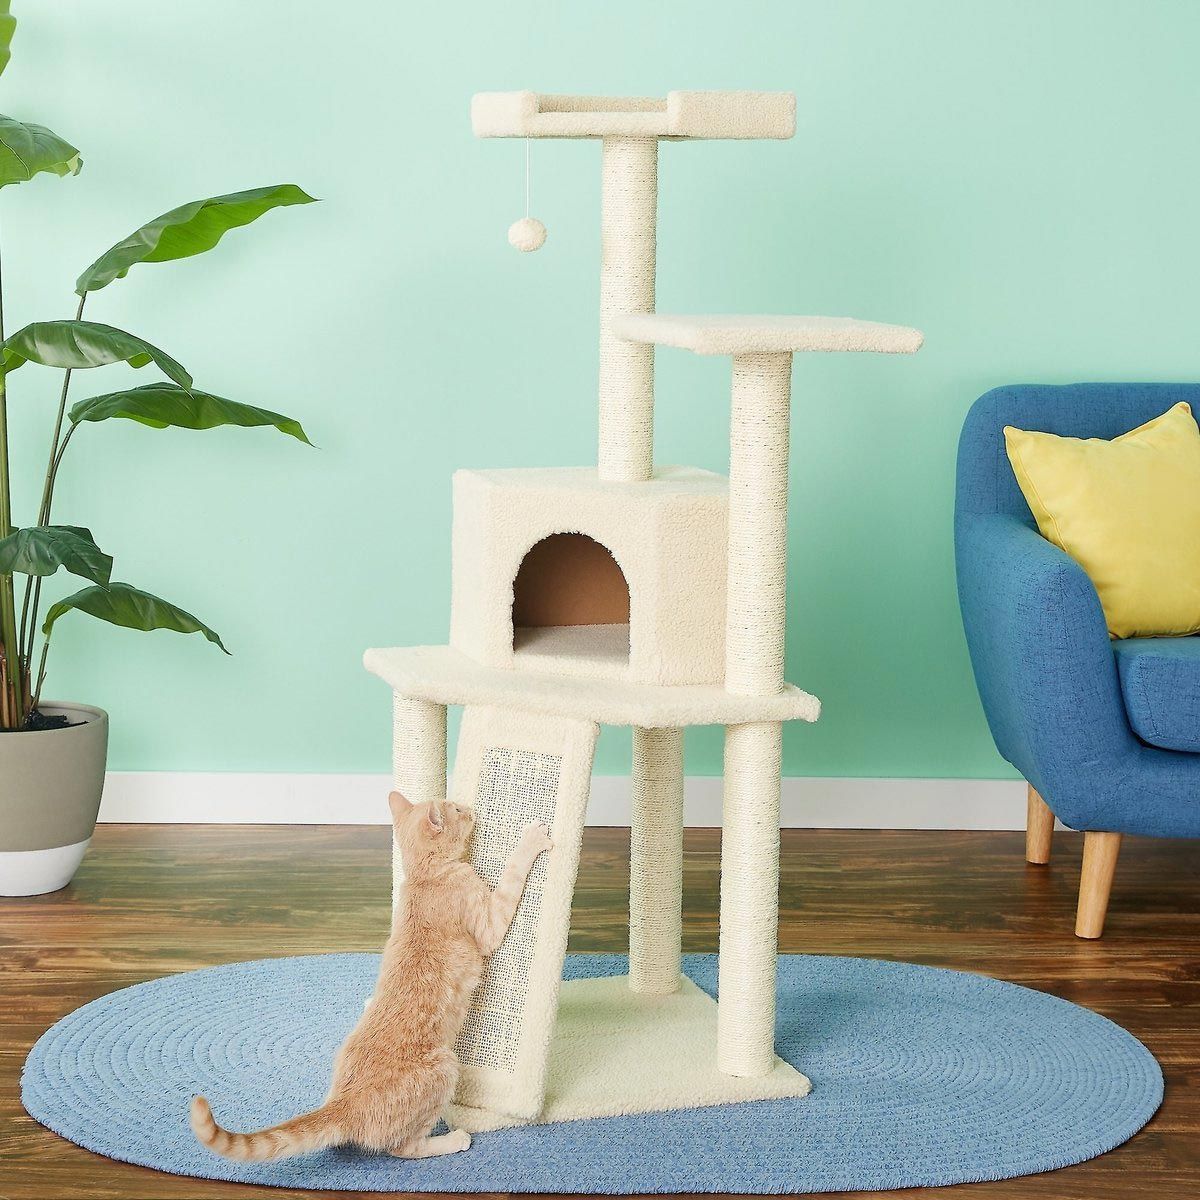 a cat is playing on a cat tree in a living room .